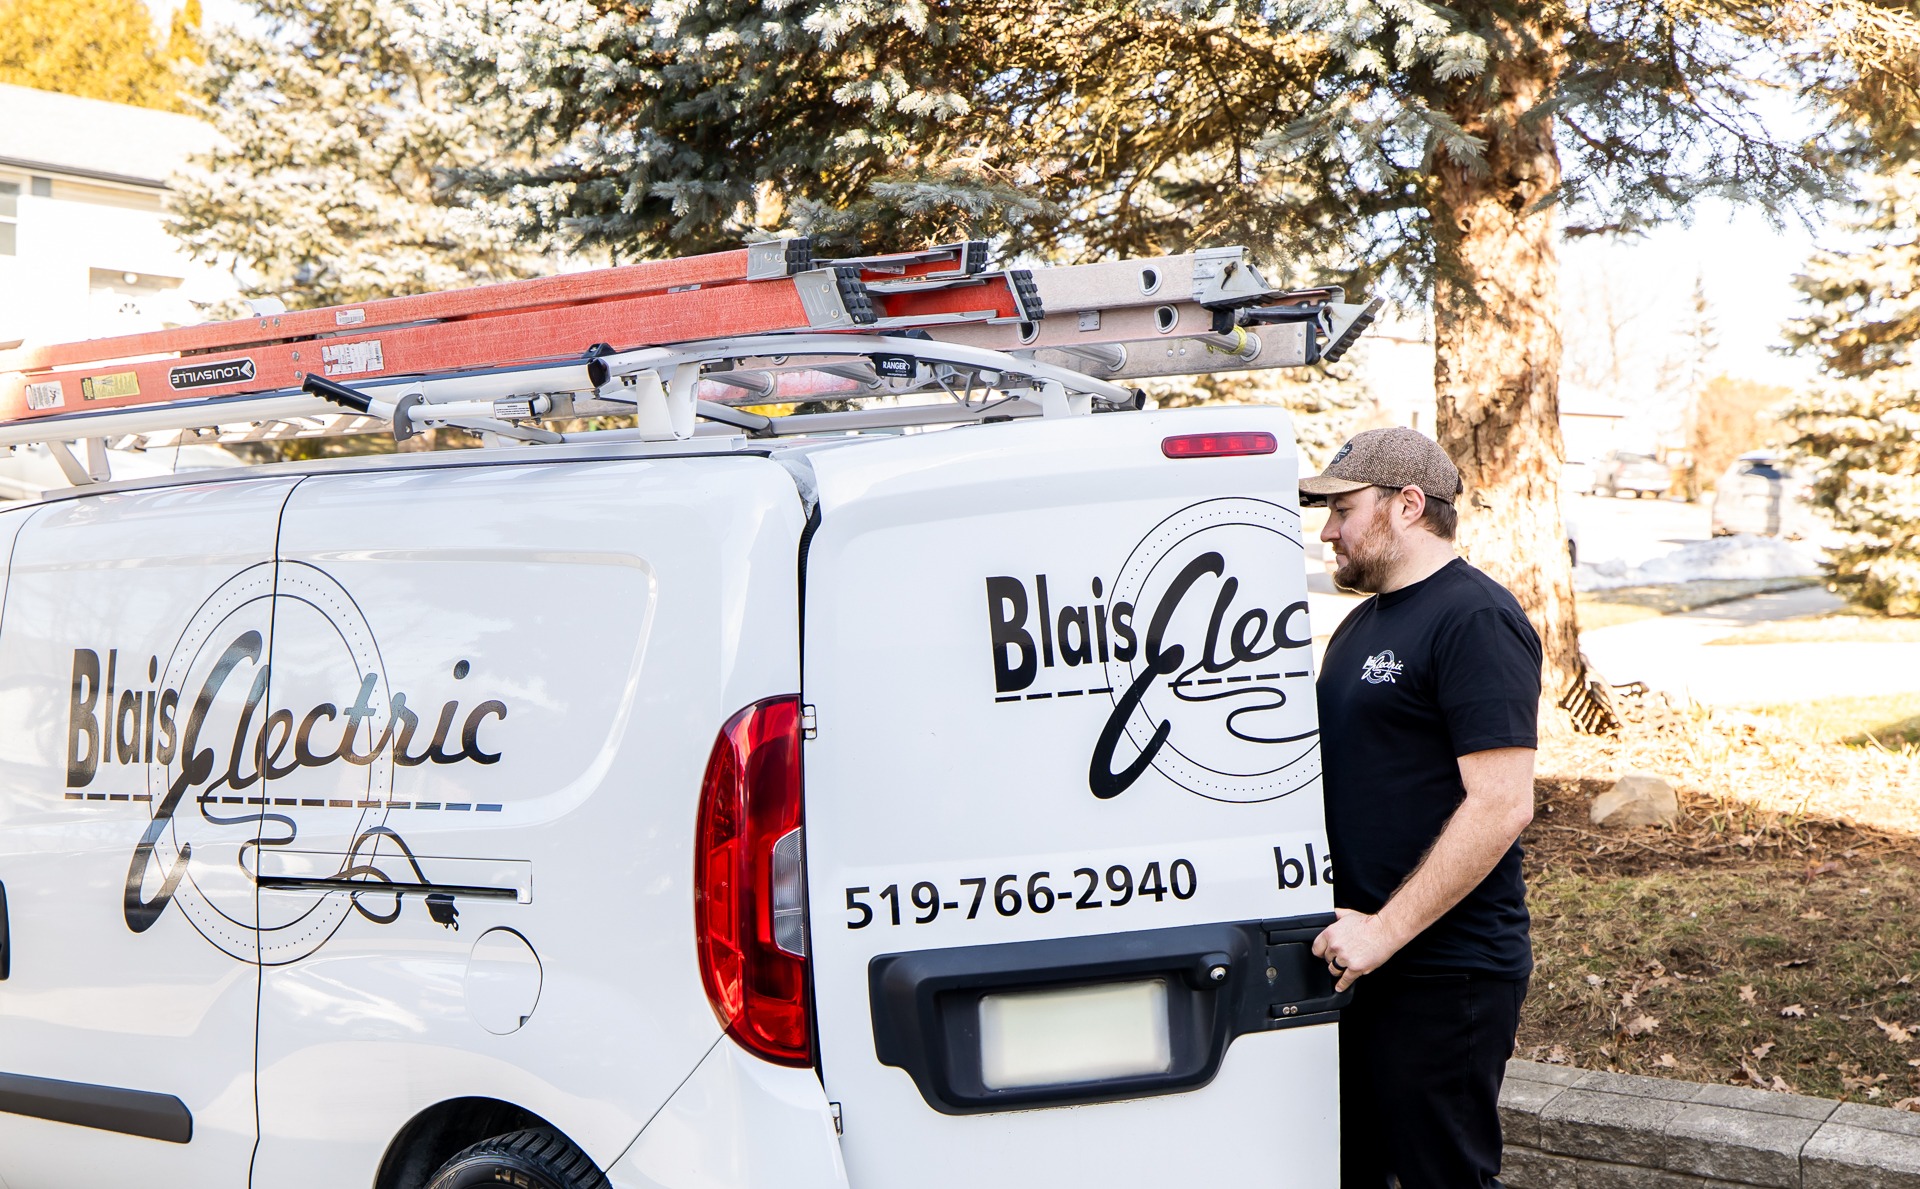 A person stands beside a white van with "Blais Electric" printed on it, equipped with ladders on top, in a residential area during daylight.